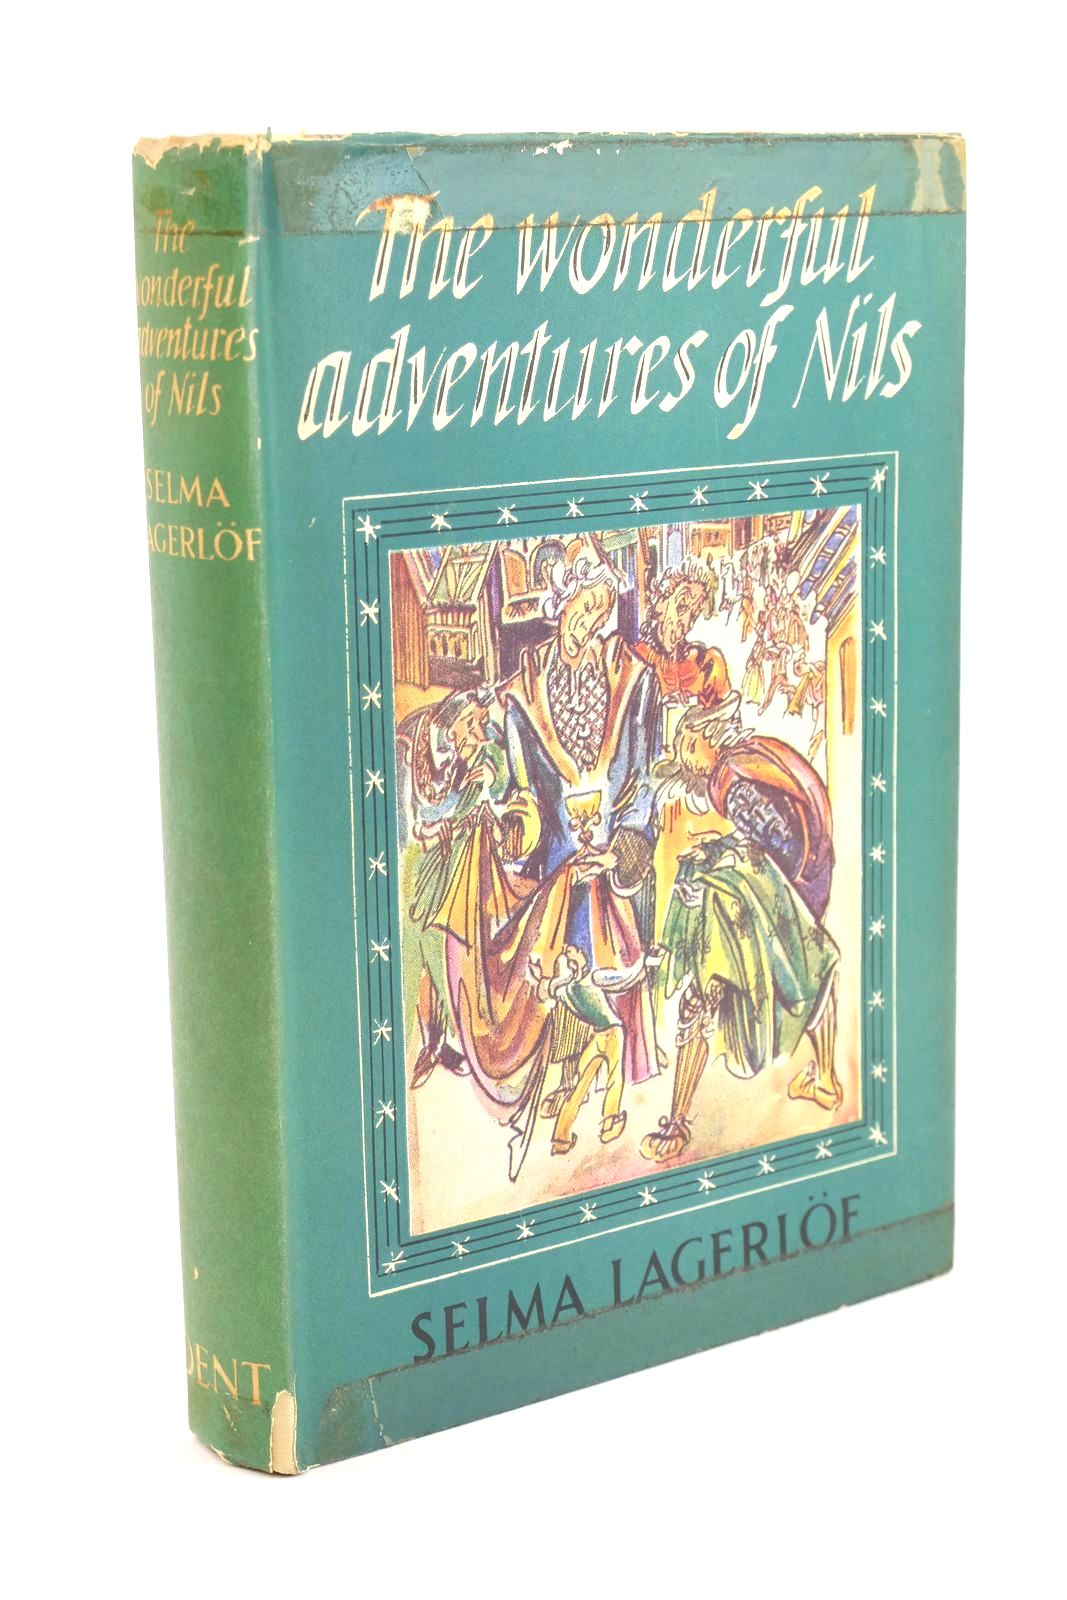 Photo of THE WONDERFUL ADVENTURES OF NILS written by Lagerlof, Selma illustrated by Baumhauer, H. published by J.M. Dent & Sons Ltd. (STOCK CODE: 1323724)  for sale by Stella & Rose's Books